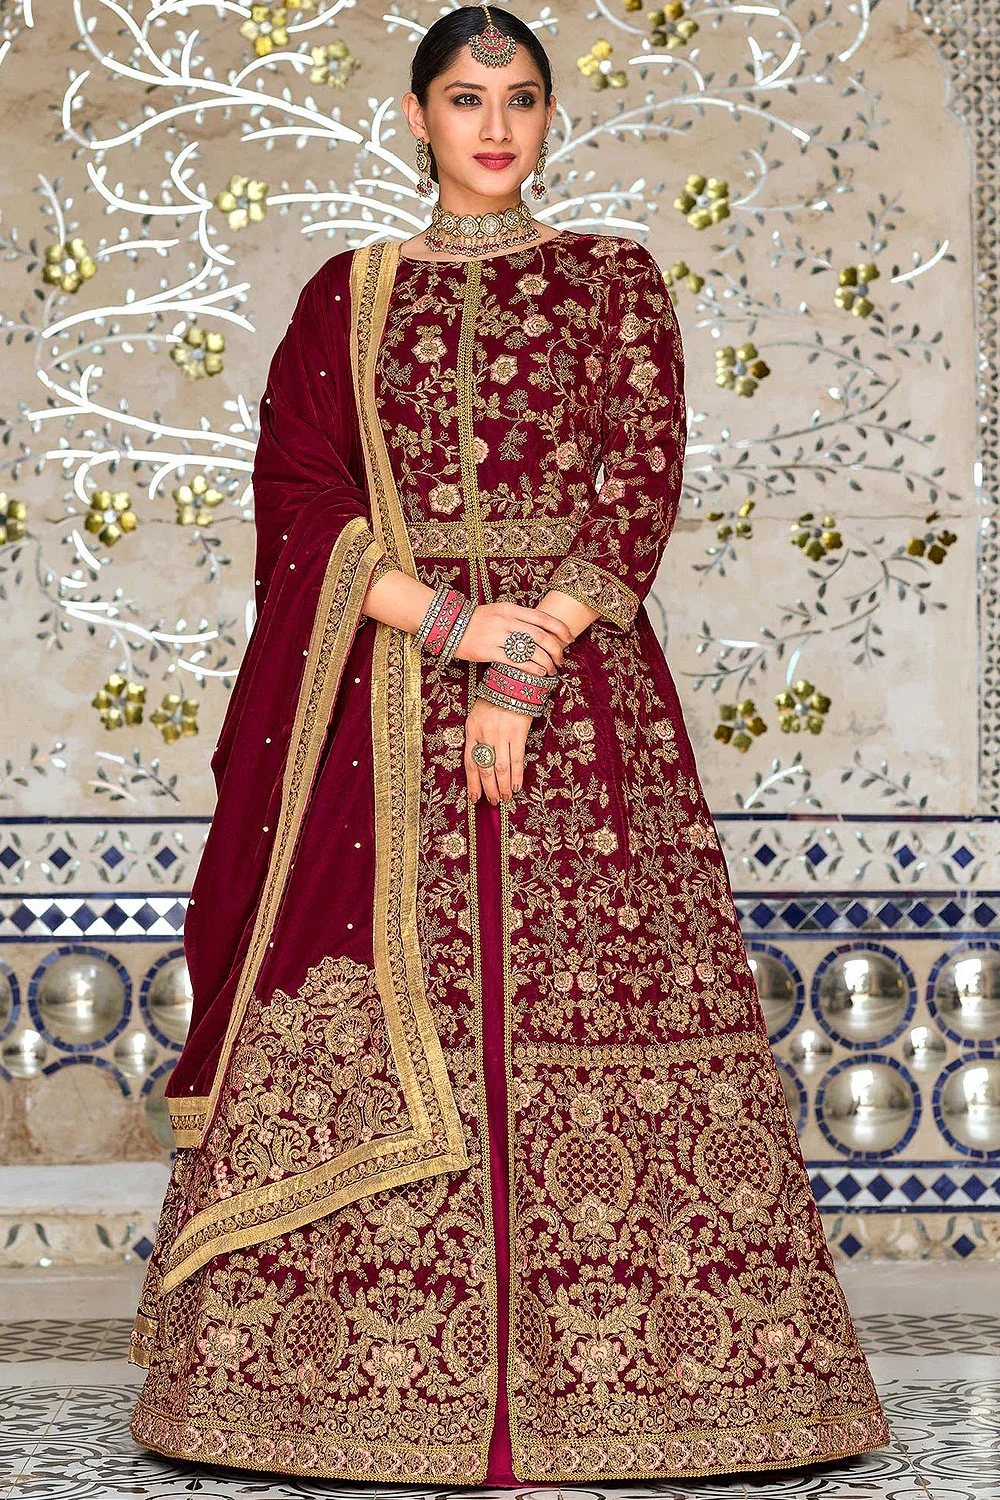 Regal Maroon Velvet Anarkali Suit with Intricate Front Embroidery and Flowing Net Skirt